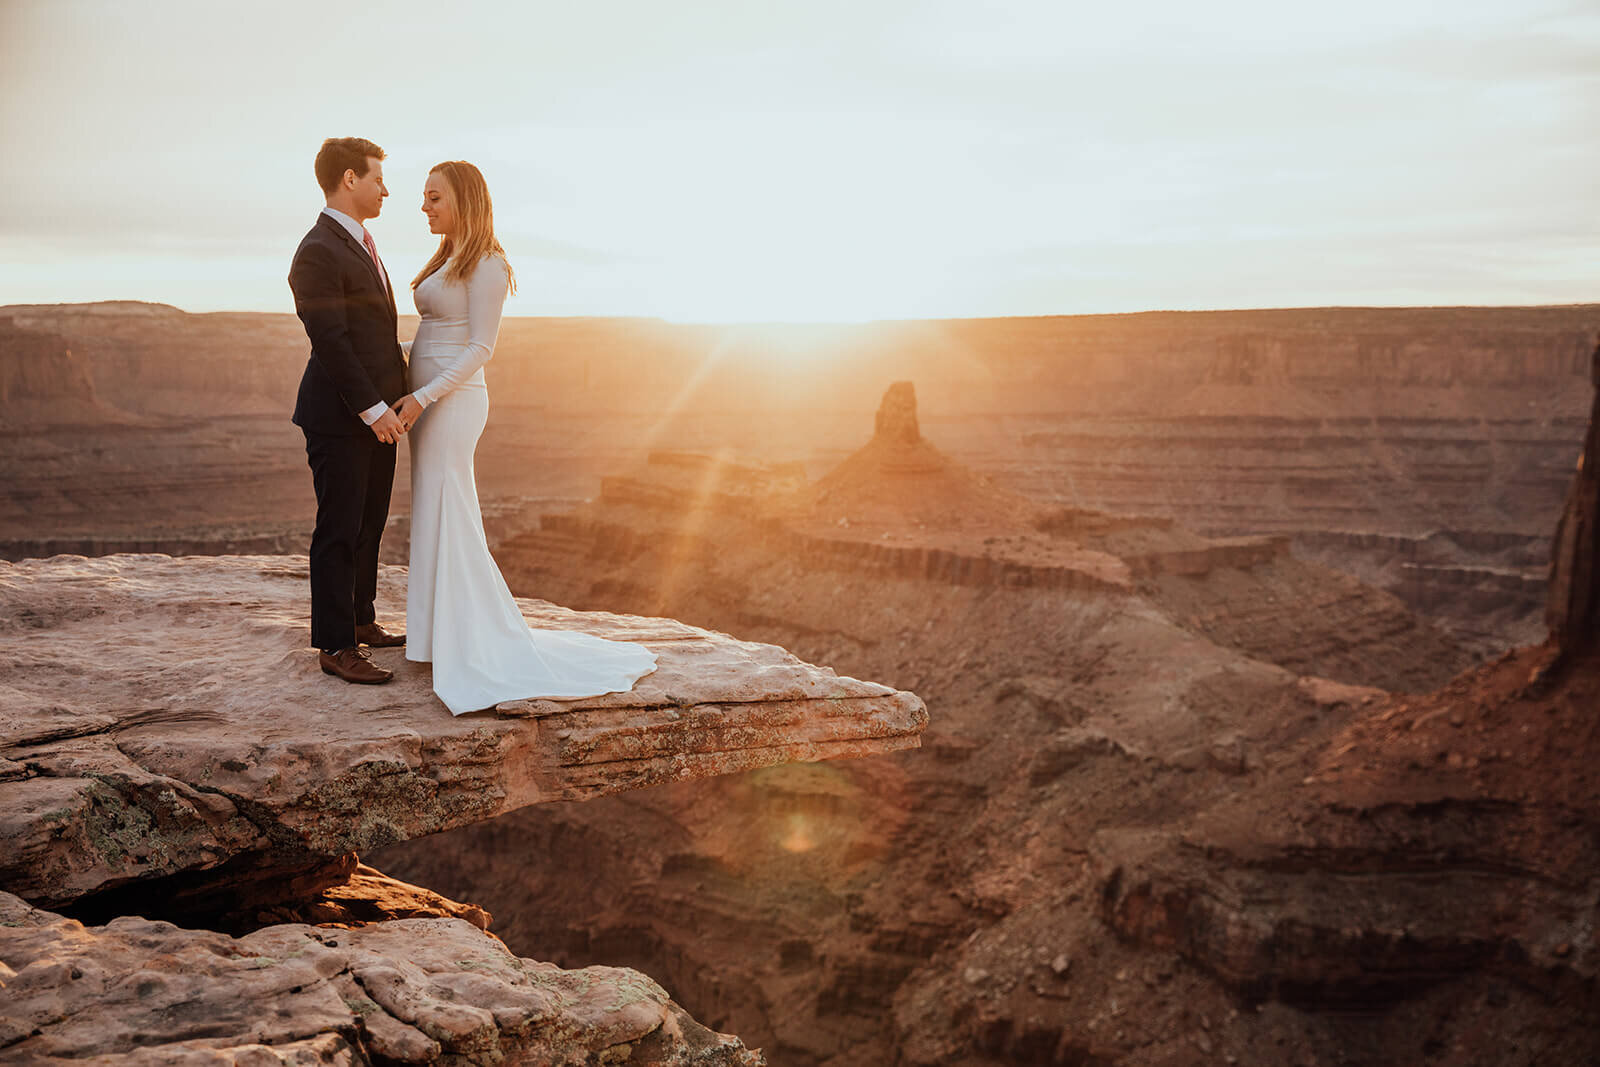  Couple celebrates anniversary and stands on cliff edge during sunset at Dead Horse Point State Park and the La Sal Mountains near Moab, Utah with incredible views and hiking. Utah elopement photographer 